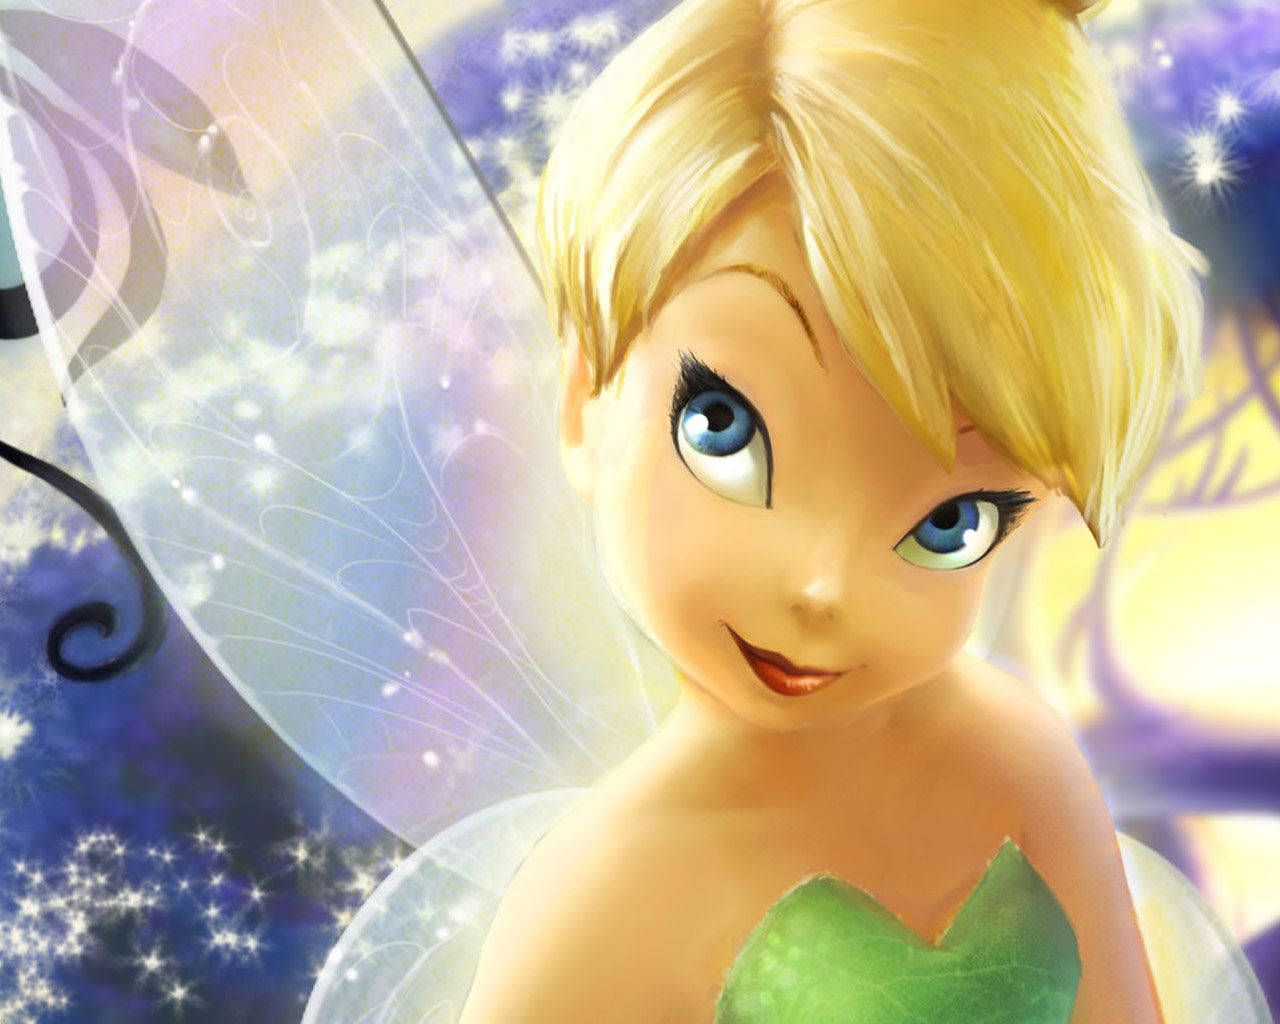 Tinker Bell is a fictional character in the Peter Pan series. She is a fairy who is best friends with Peter Pan. She is known for her green dress and blonde hair. - Tinkerbell